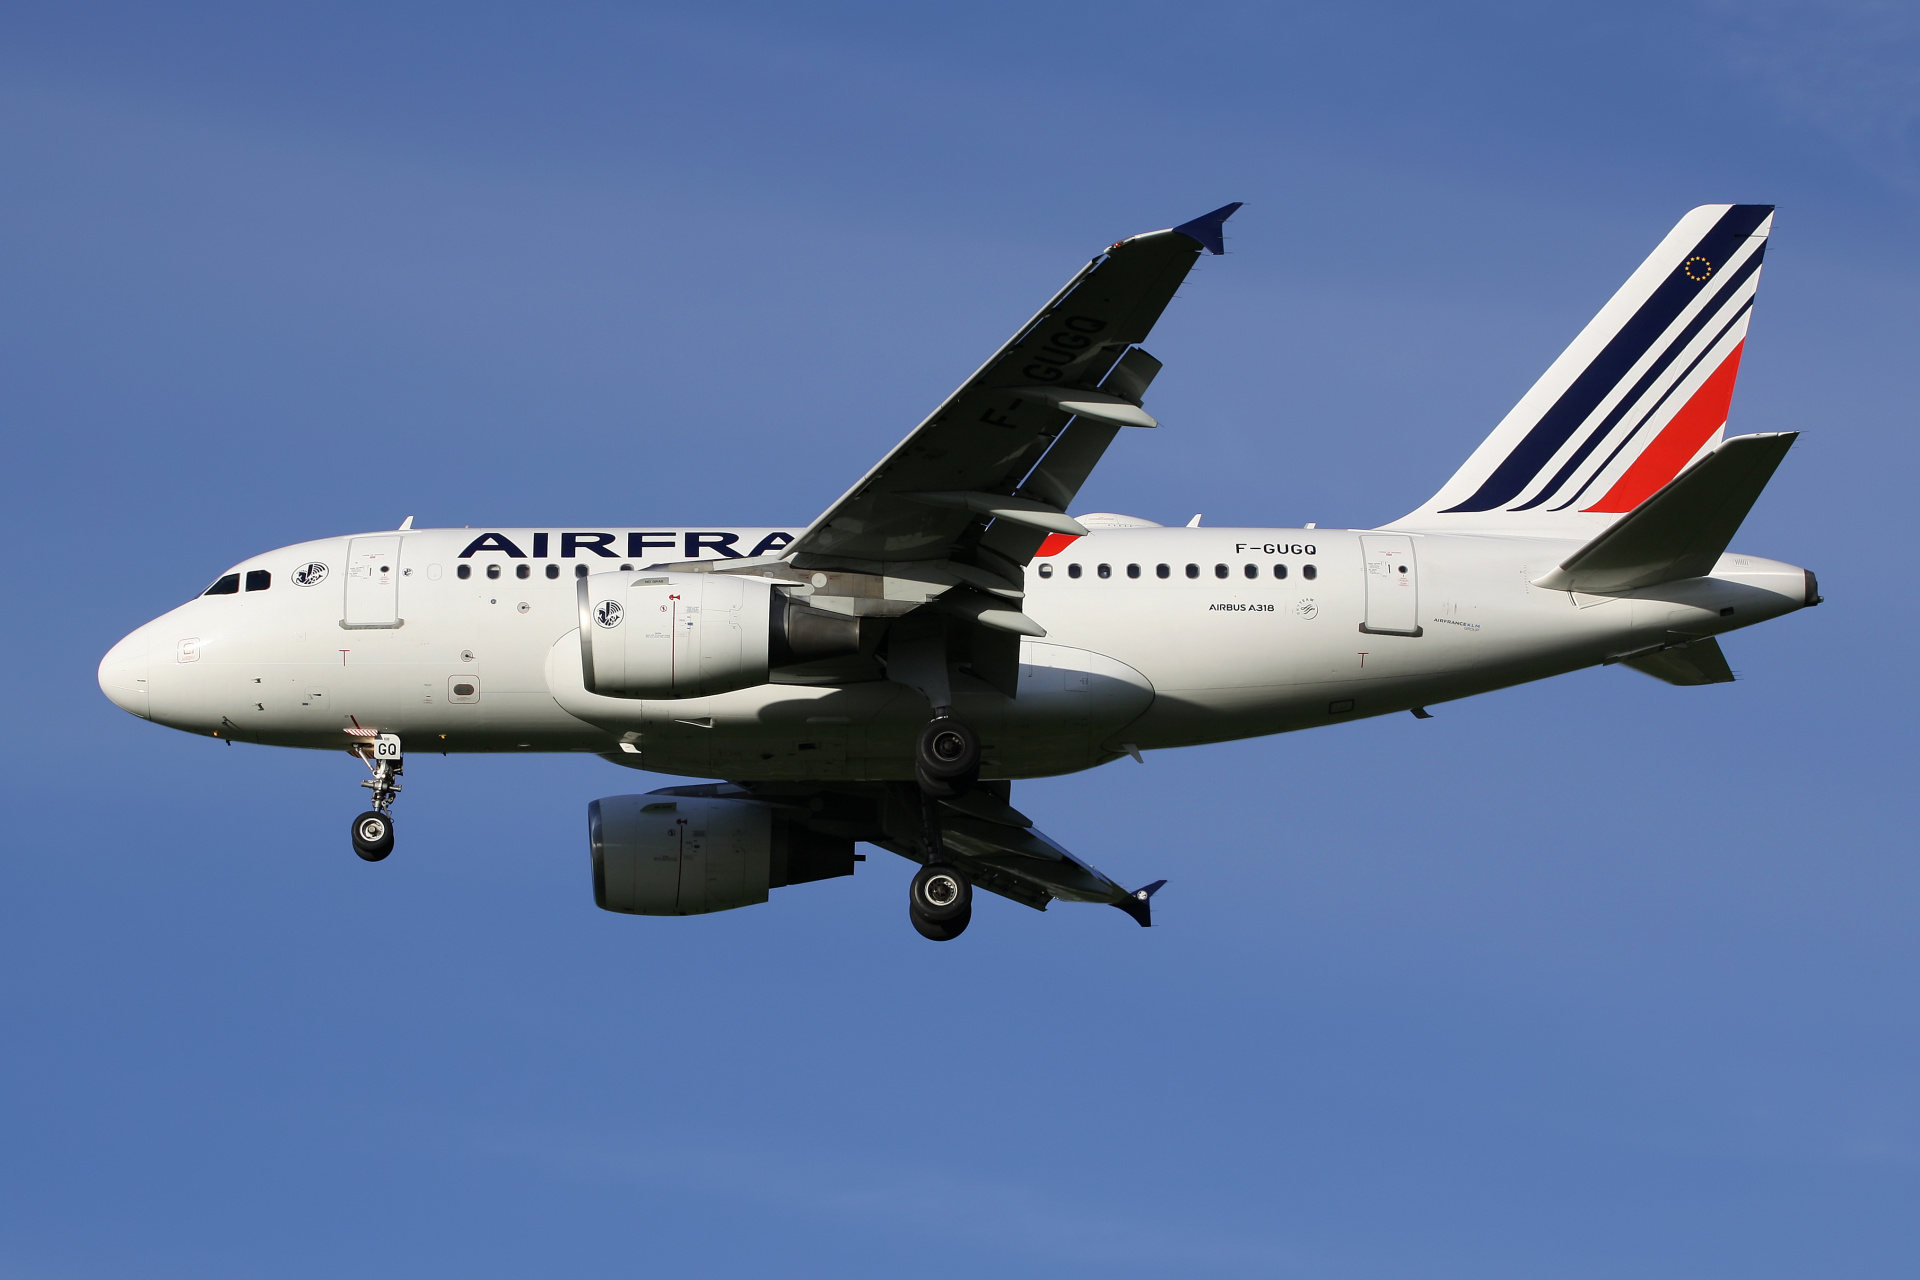 F-GUGQ (updated livery) (Aircraft » EPWA Spotting » Airbus A318-100 » Air France)